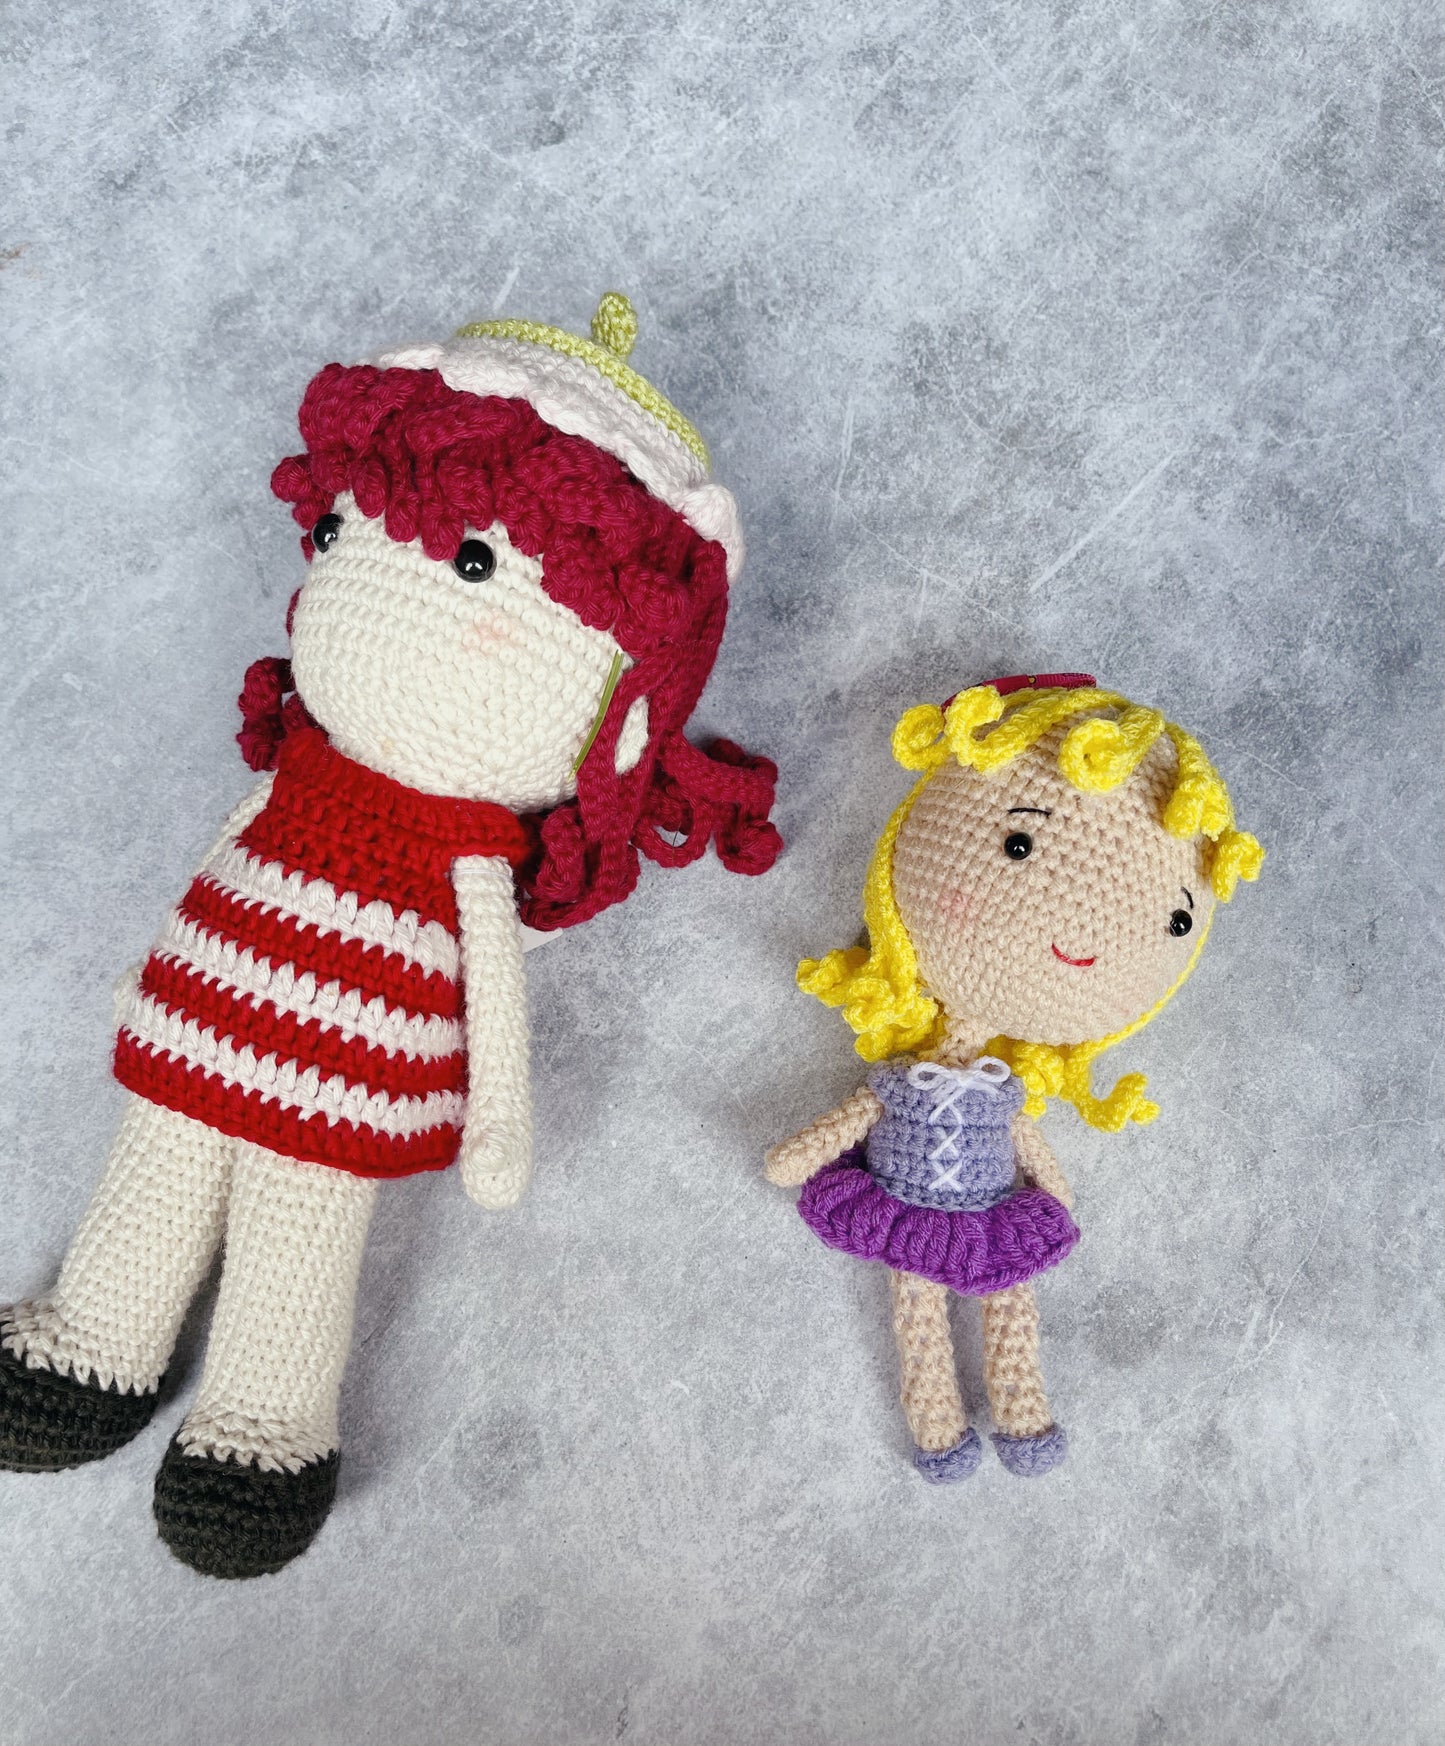 Strawberry Kiss Handmade Knitted Doll